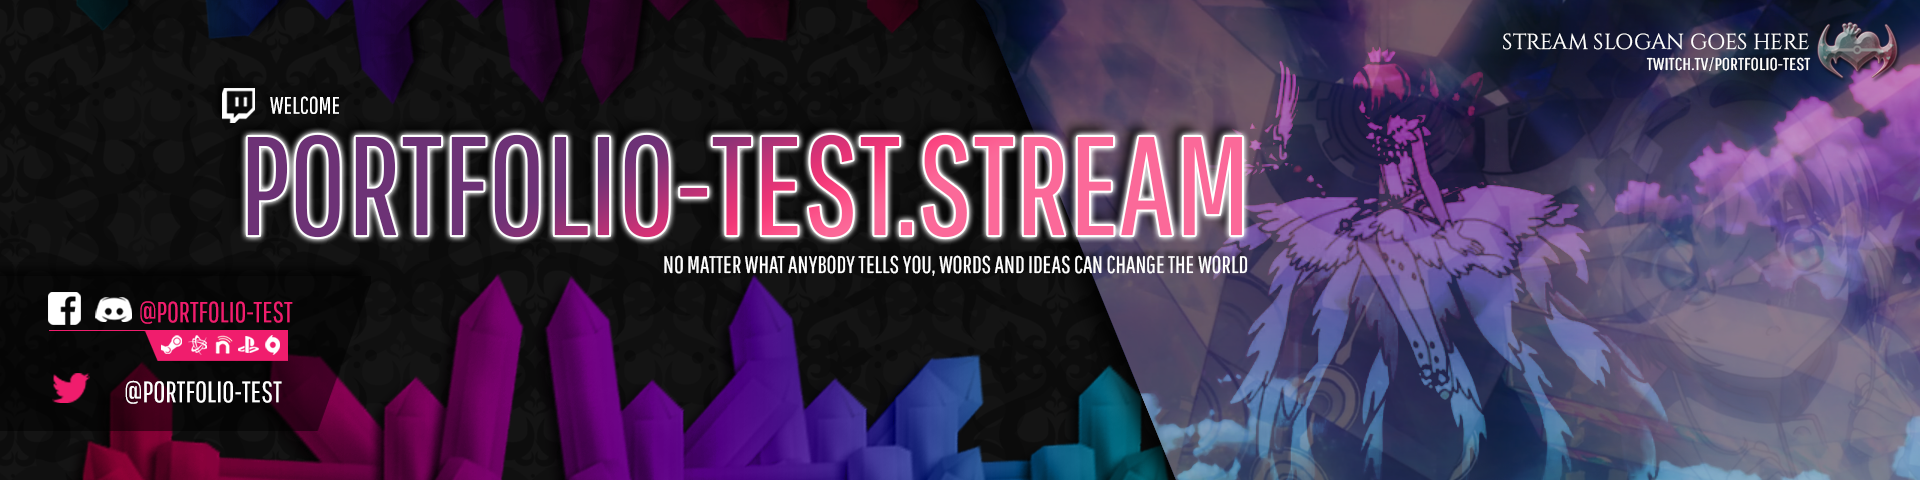 Banner image for a streaming channel page. It is dark charcoal with a dark pink to teal gradient of crystals along the bottom and a faded crystal gradient along the top. A cutout that appears glassy is on the right, featuring images of the magical girl Cardcaptor Sakura colored in a similar gradient. In the upper right there is a logo, the text "Stream Slogan Goes Here" and a direct link. In the lower left there is a minimal banner describing social media information. In the center in large text it says "Portfolio-Test.Stream" and below as a subheader it says "No Matter what anybody tells you, words and ideas can change the world"